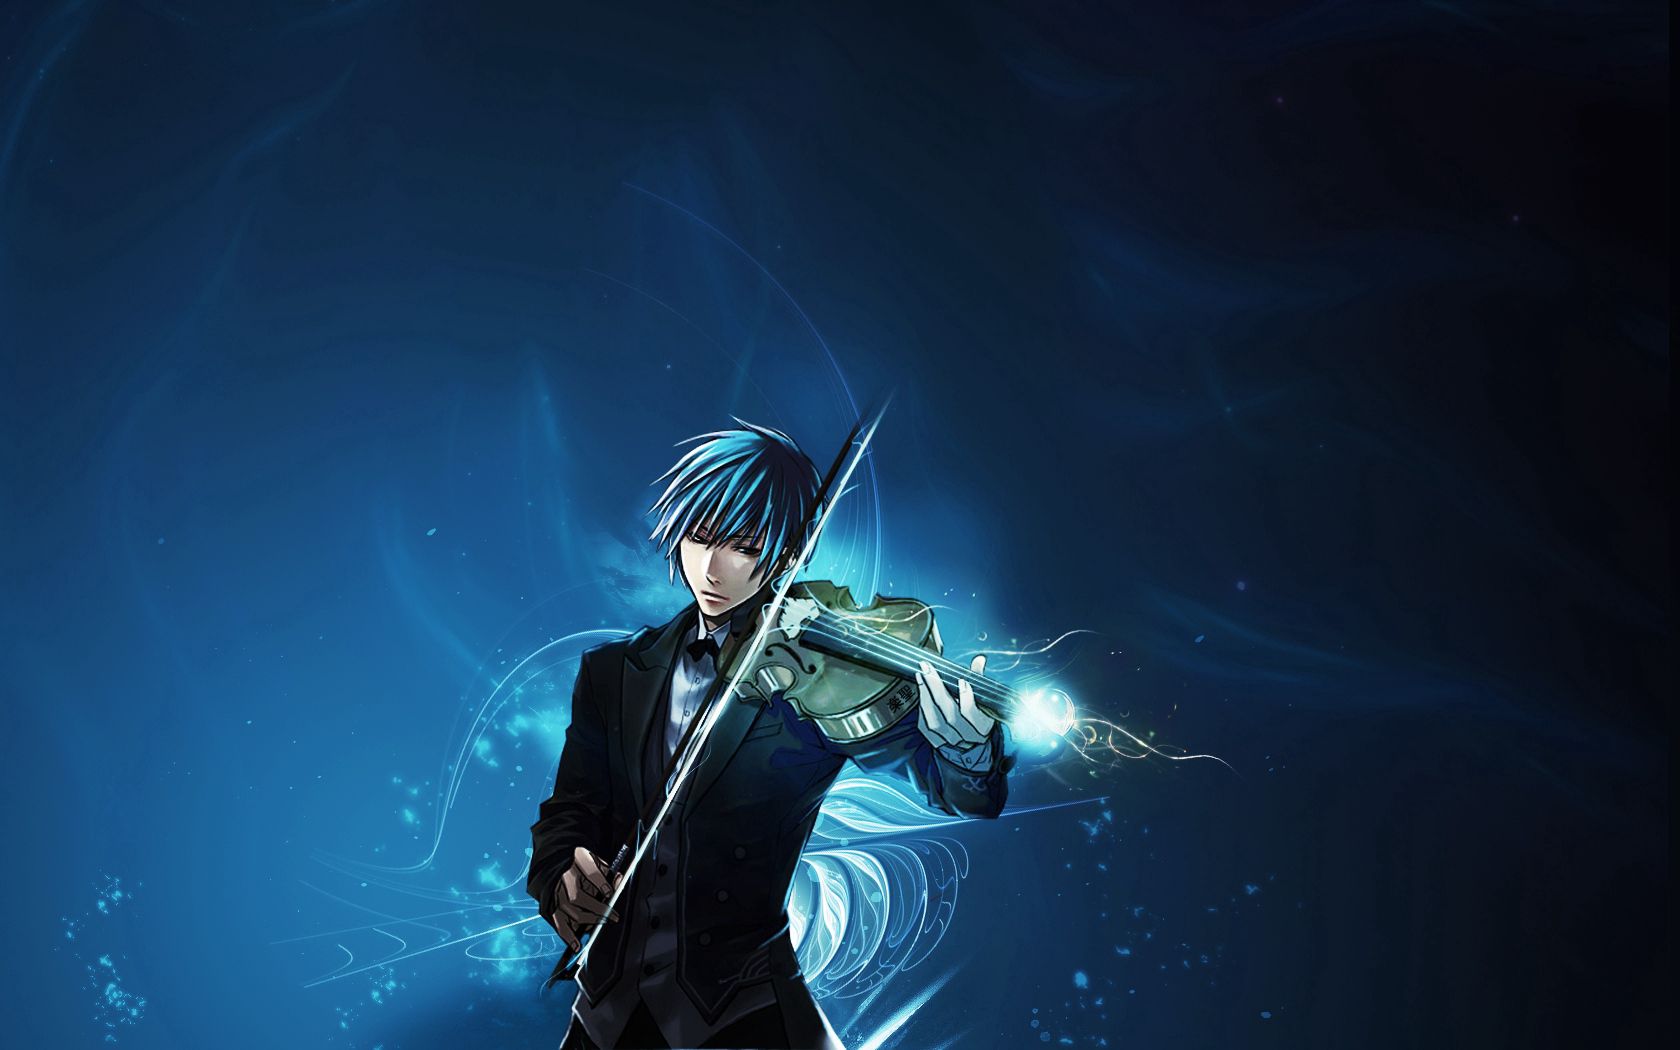 High Definition wallpaper guy, violin, space, anime